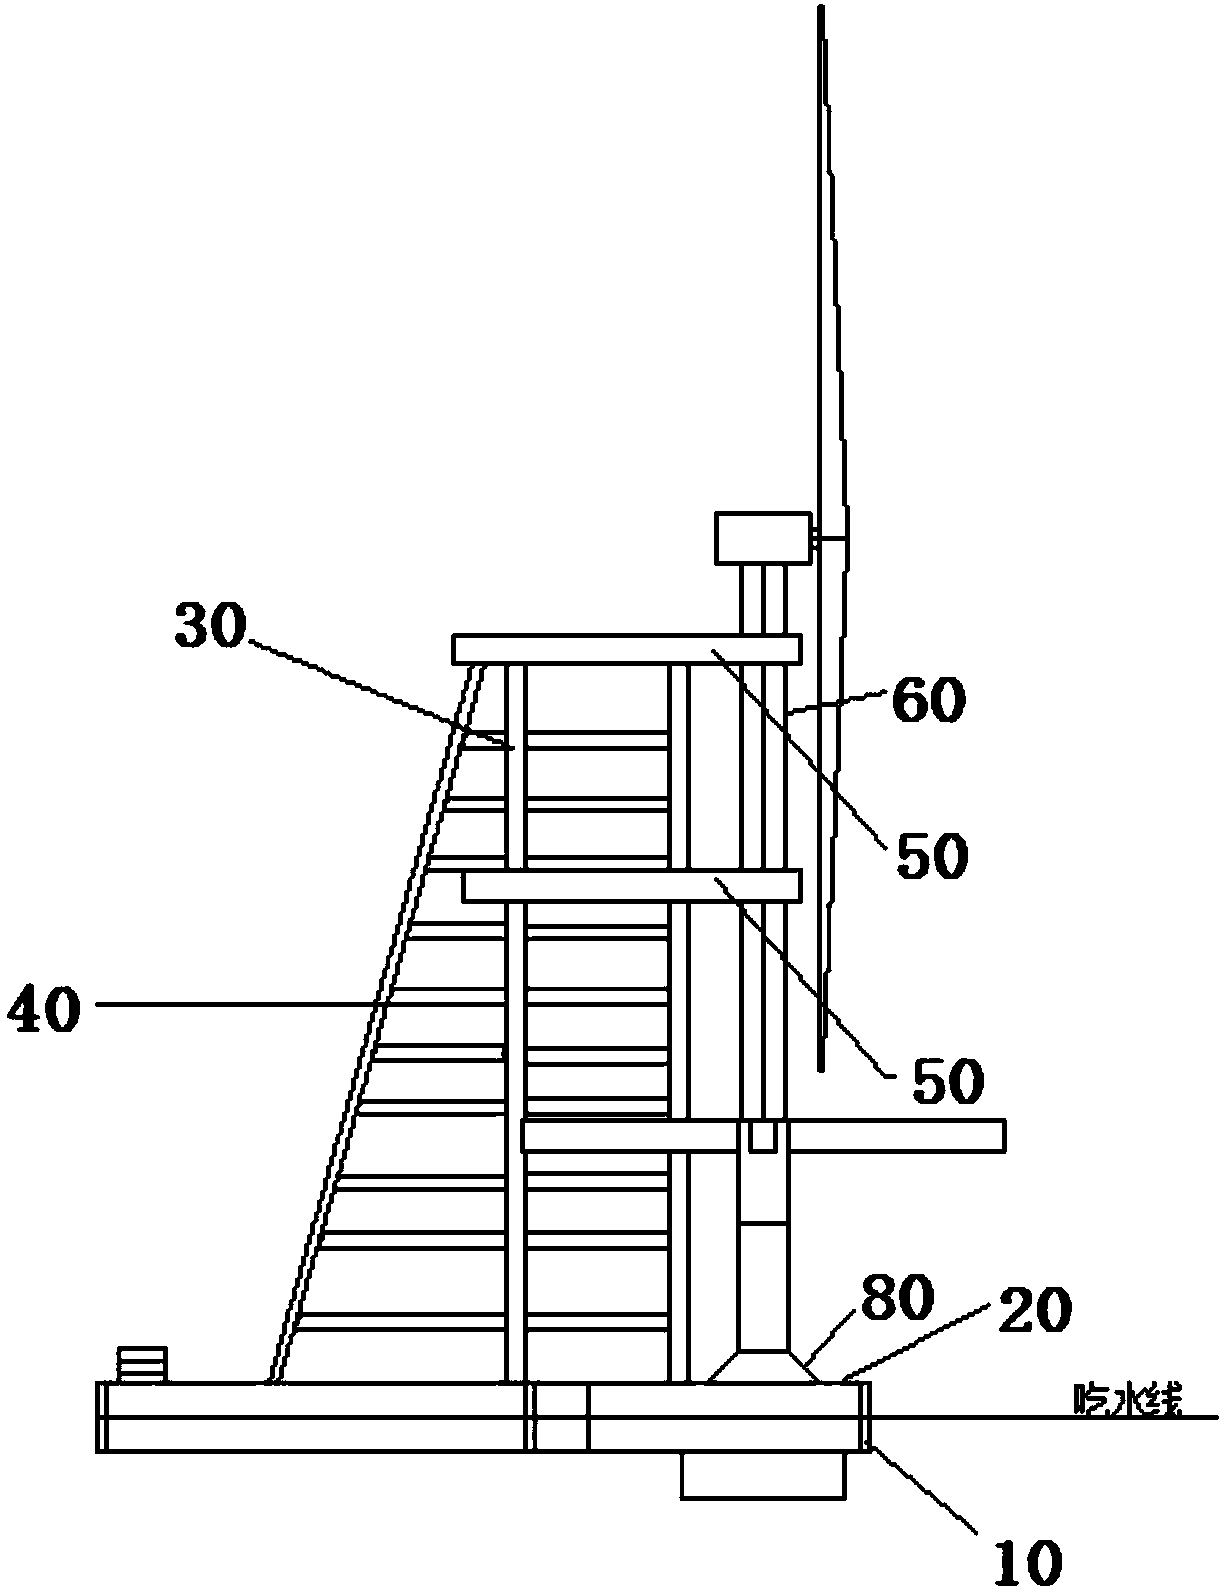 Floating-type fan and tension leg platform (TLP) transporting and mounting integrated ship and transporting and mounting method thereof